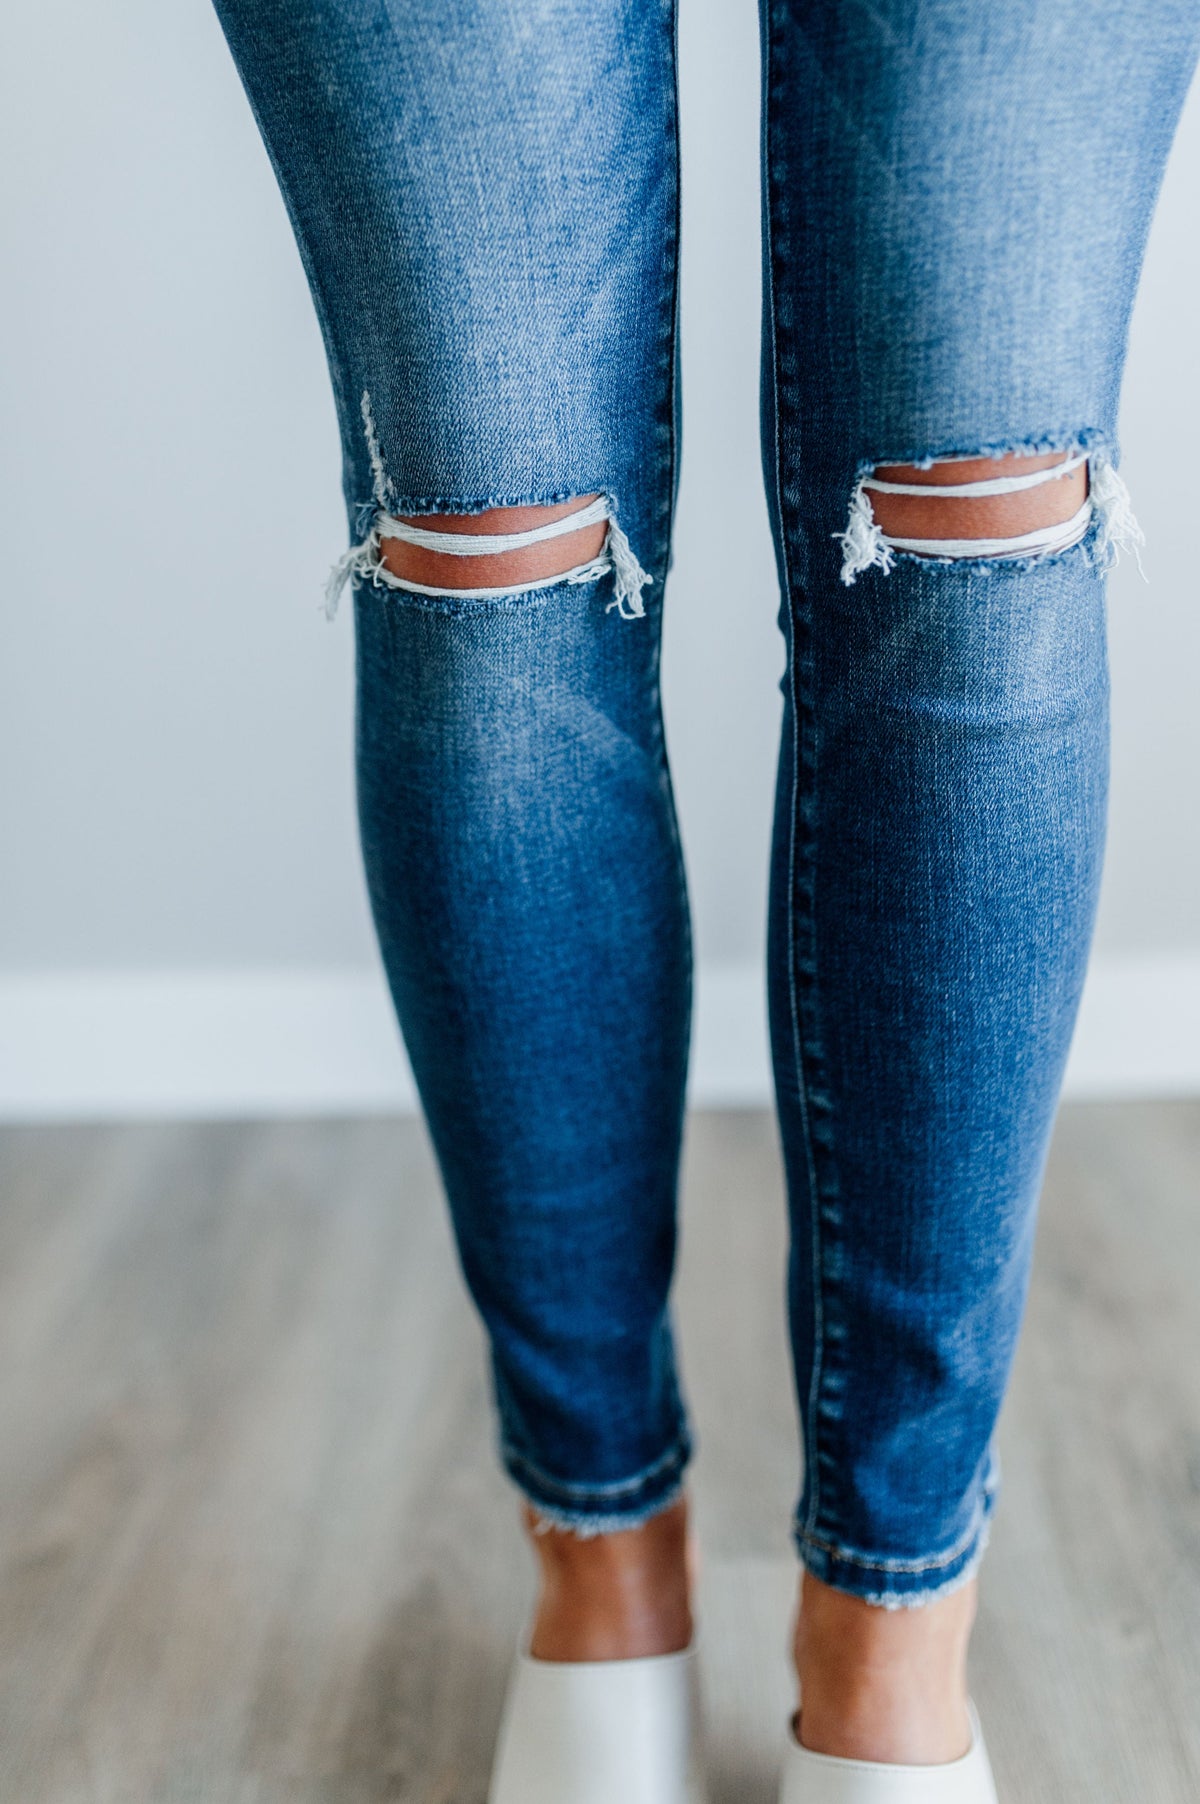 Pictured is a mid-wash, pair of denim with a mid-rise waist, medium-wash, knee slits, and cropped ankle with distressed hem.